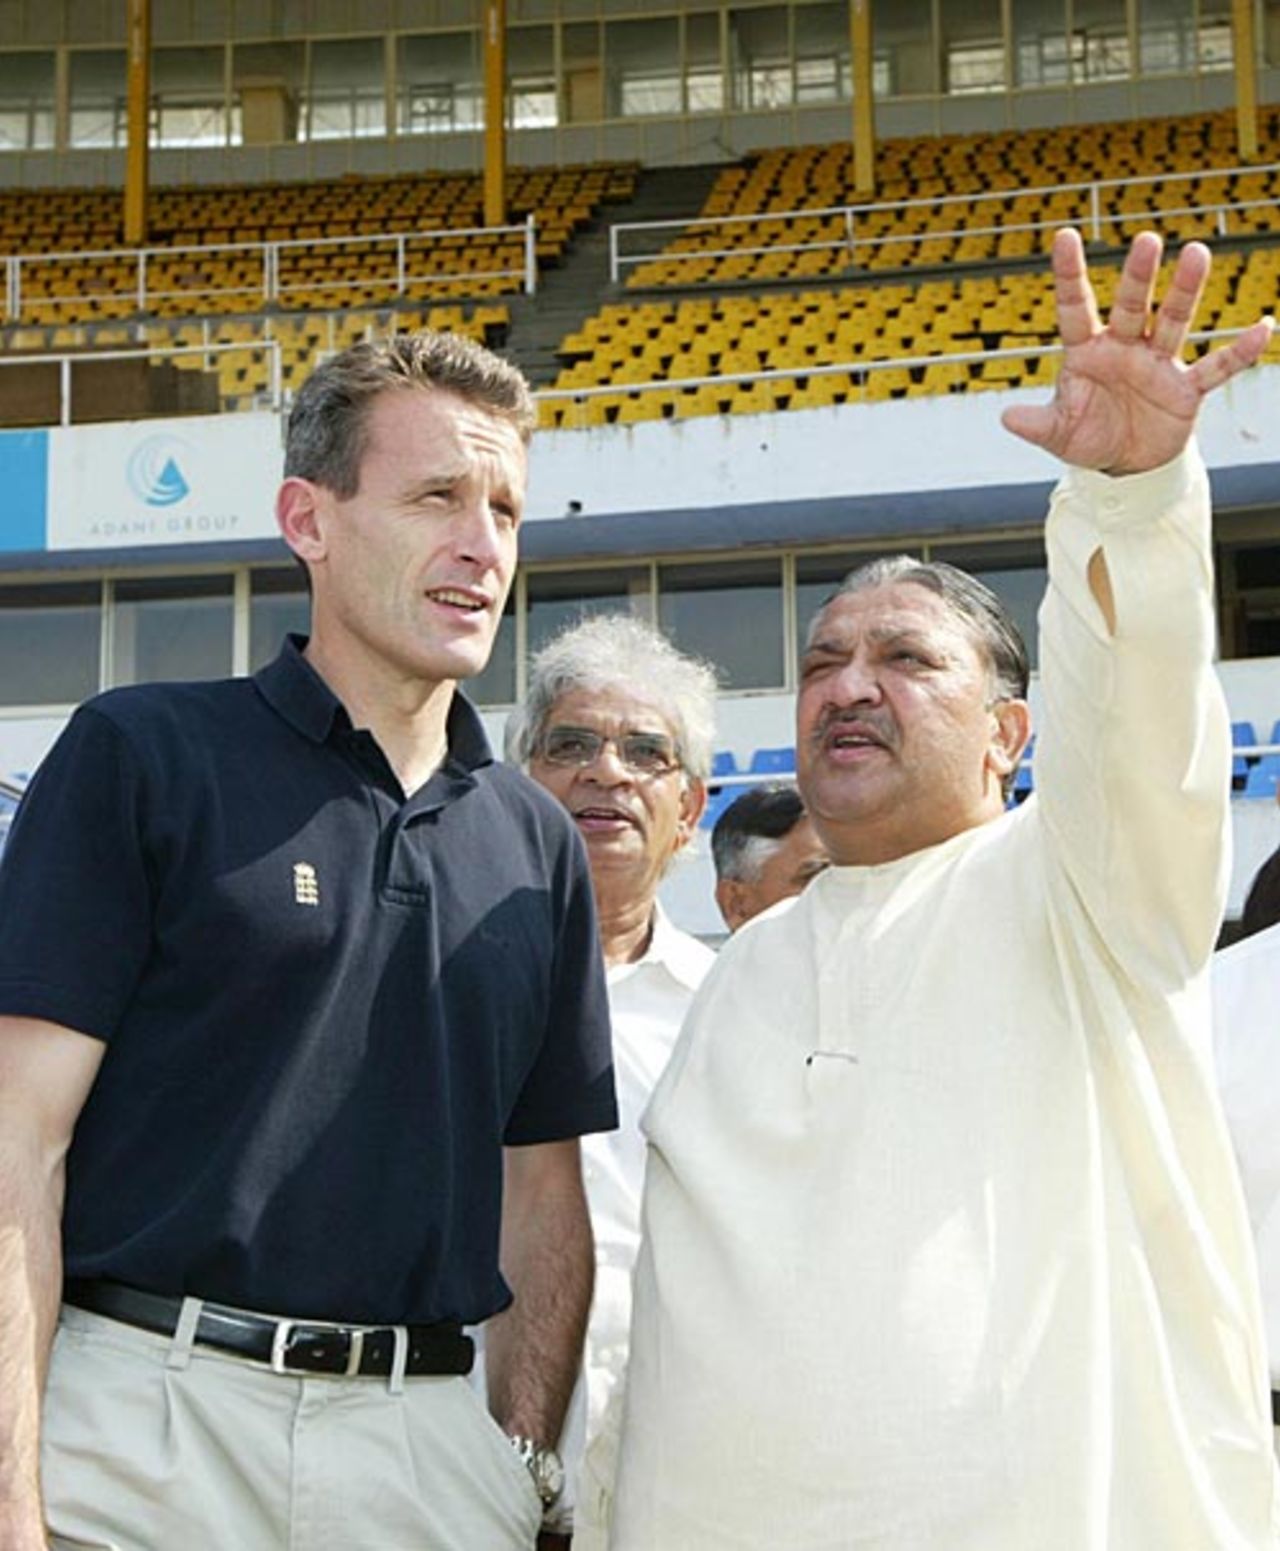 John Carr, the England board's director of cricket operations, visits the Sardar Patel Stadium in Ahmedabad, where England will play a Test in December, Ahmedabad, September 24, 2007